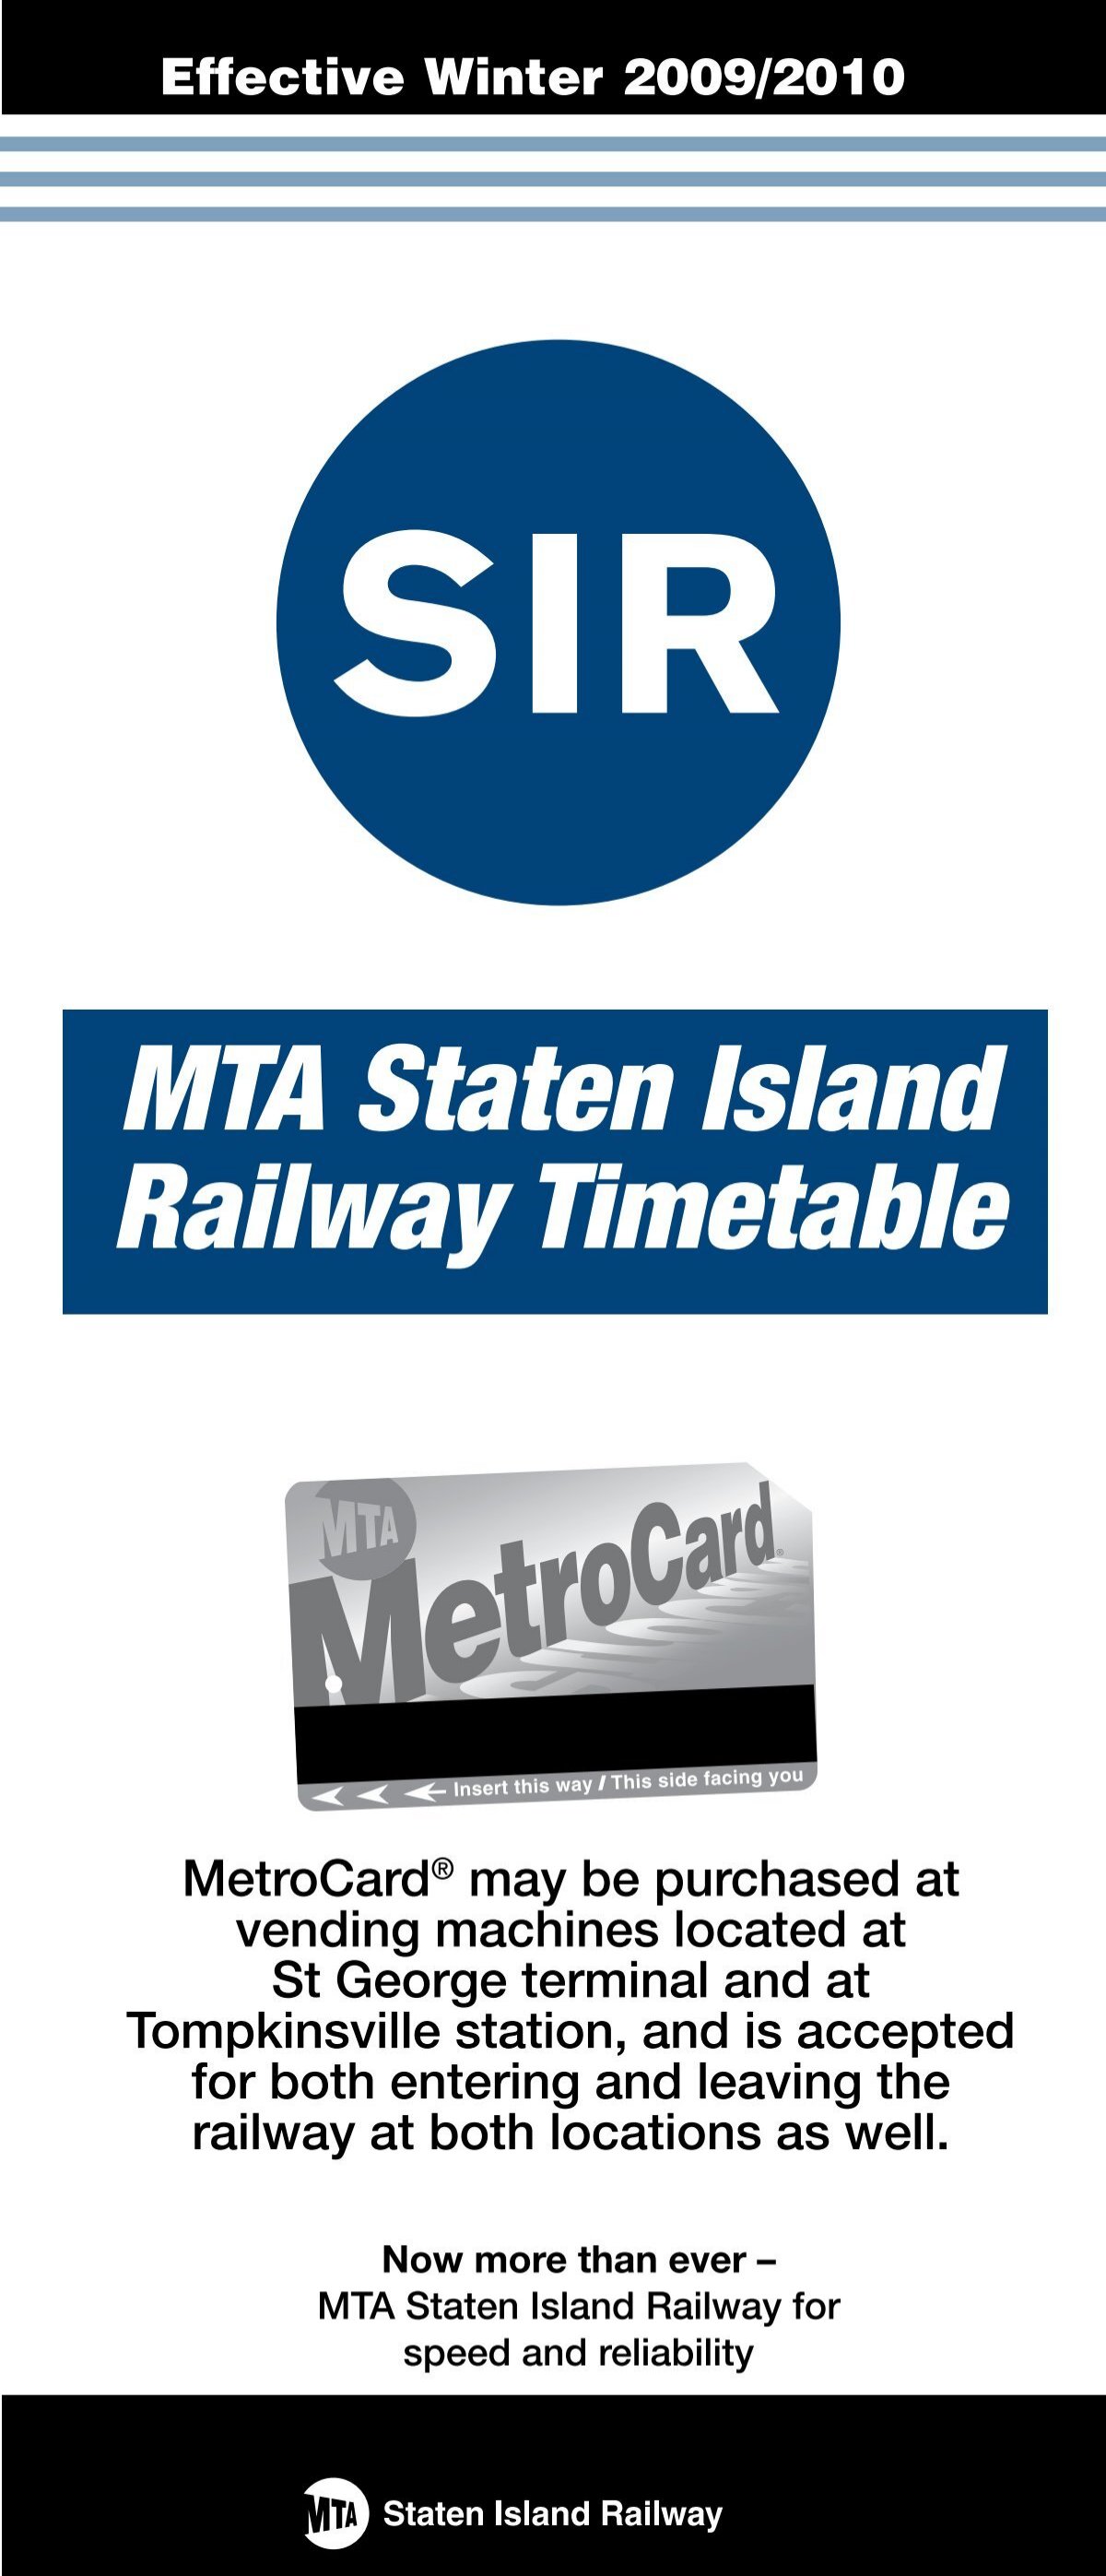 where can i buy a metrocard on staten island